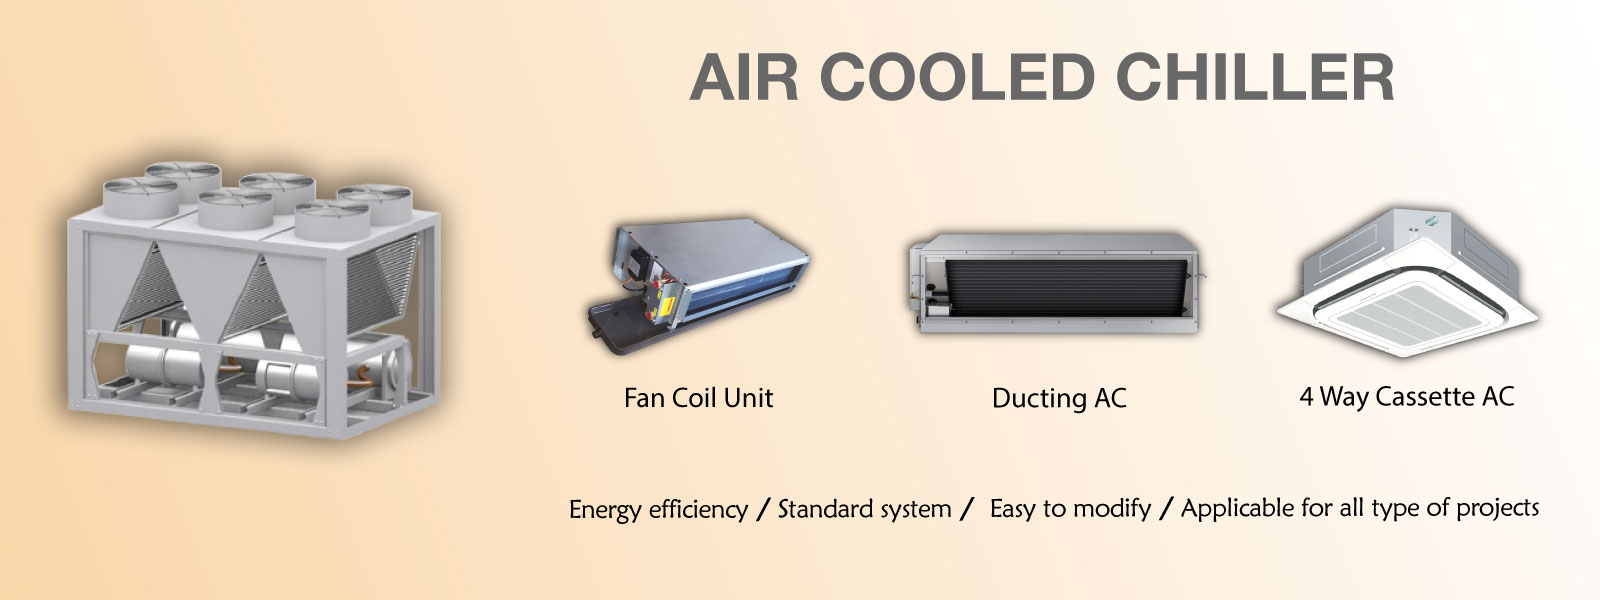 Air Chilled System